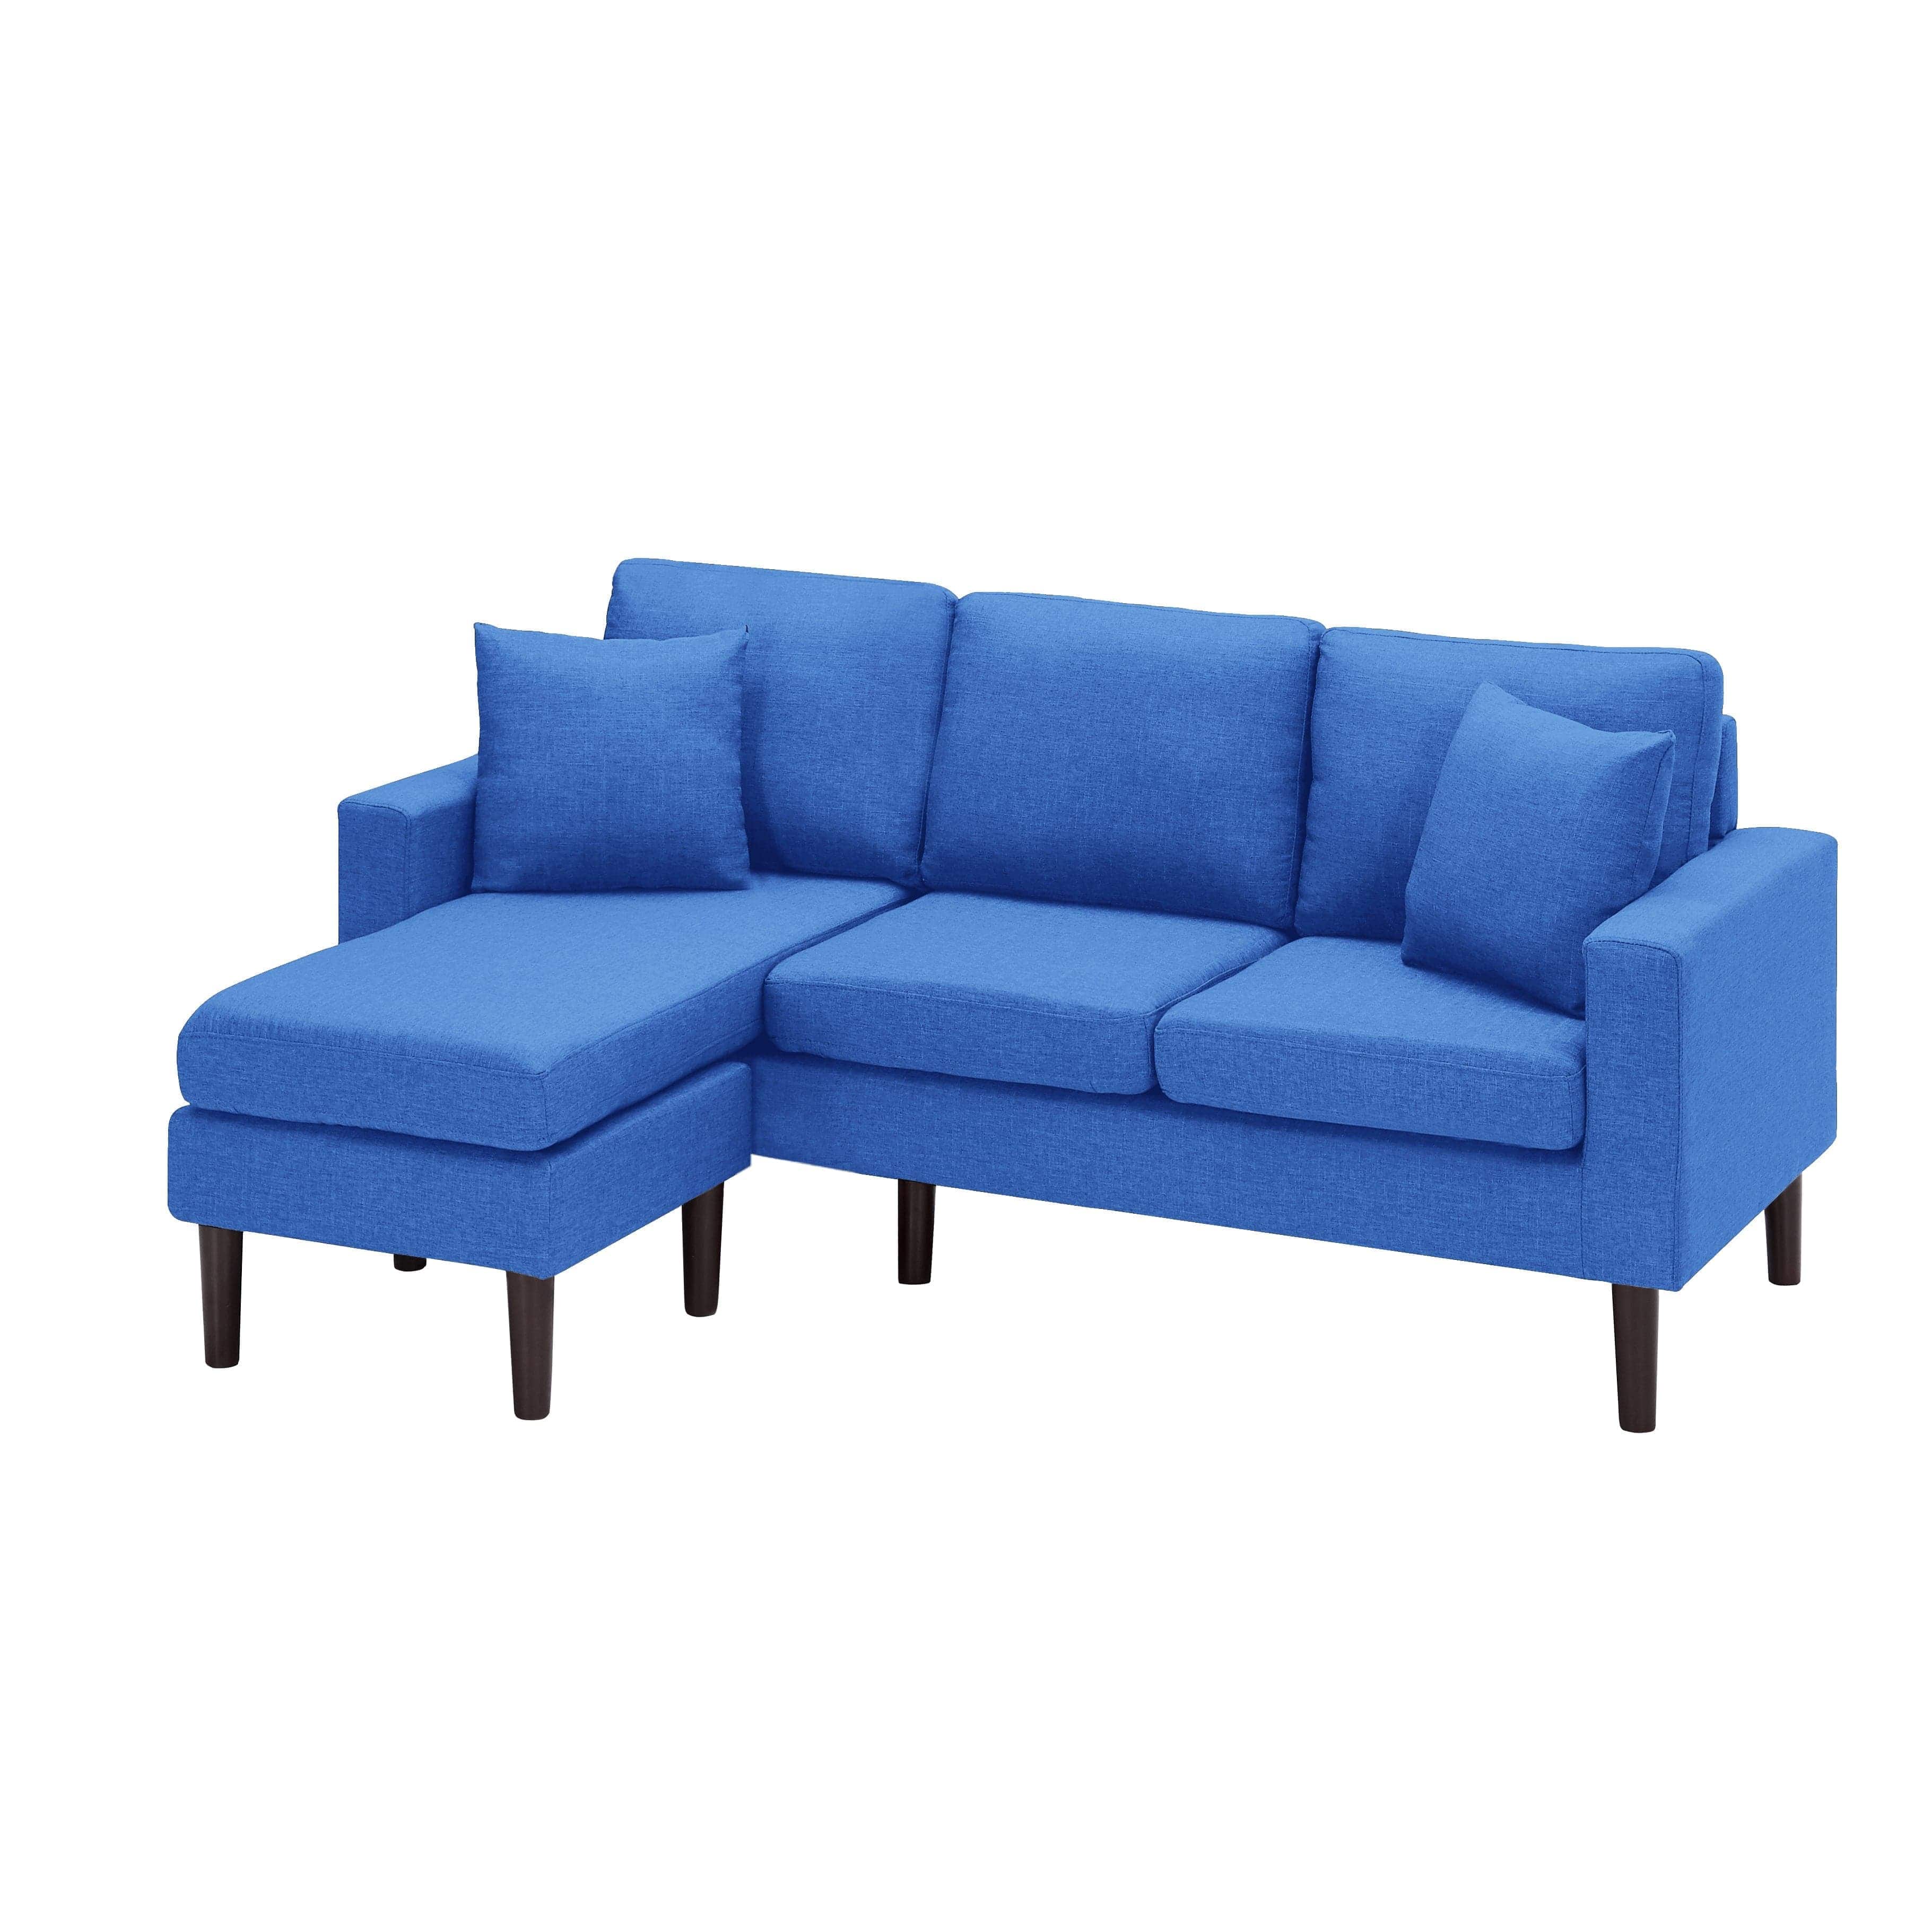 - TFC&H Co. 72" SECTIONAL SOFA LEFT HAND FACING W/ 2 PILLOWS - Blue- Ships from The US - sectional at TFC&H Co.